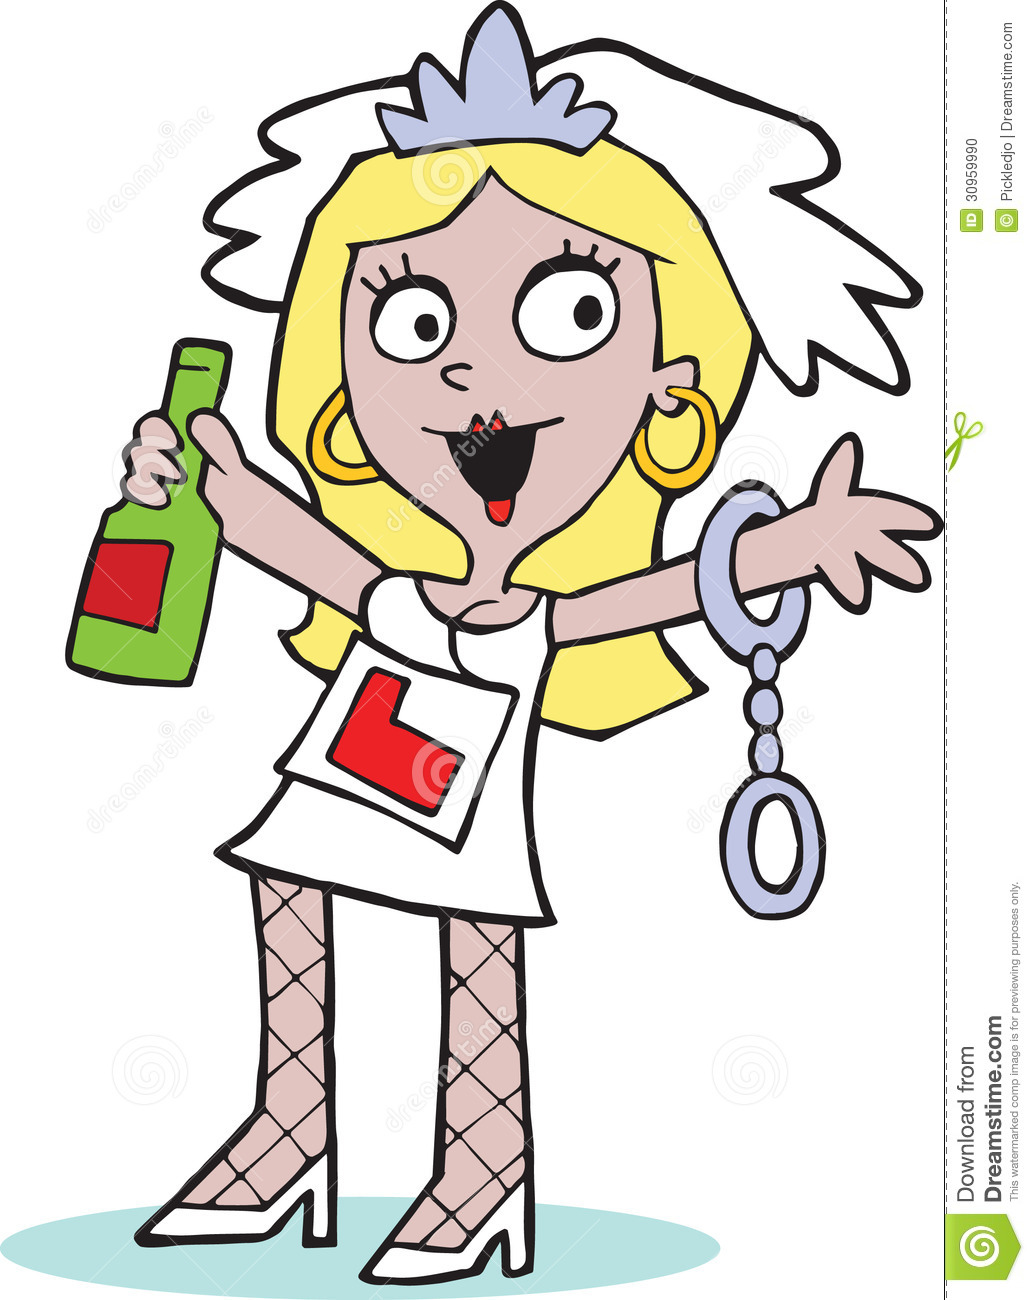 Fun Cute Cartoon Image Of A Drinking Bride To Be  She Is Drinking Wine